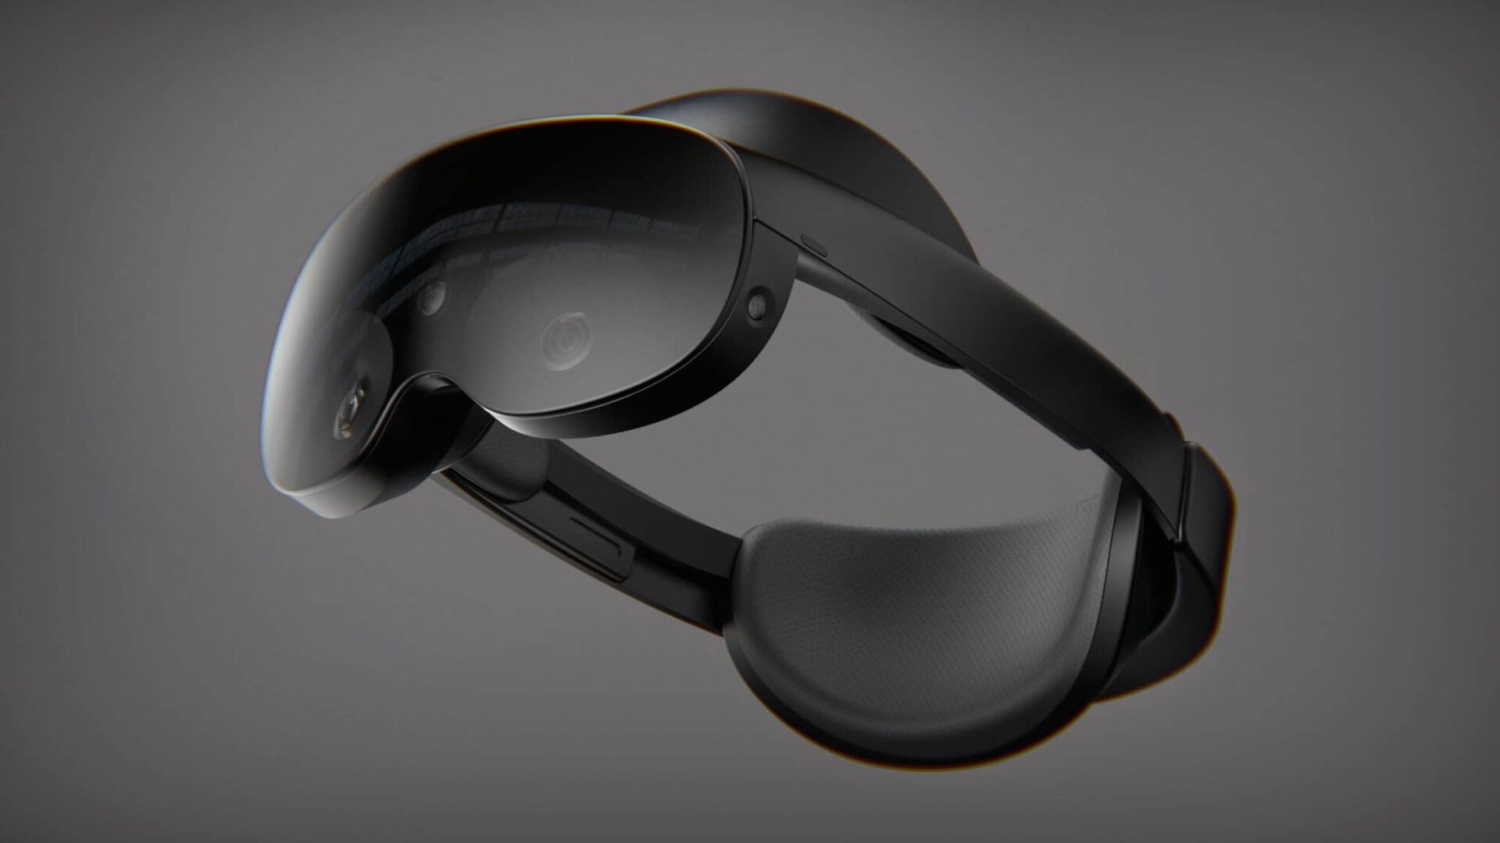 Koordinere Cirkel skud Meta Quest 2 Pro to arrive as an answer to Apple's upcoming AR headset